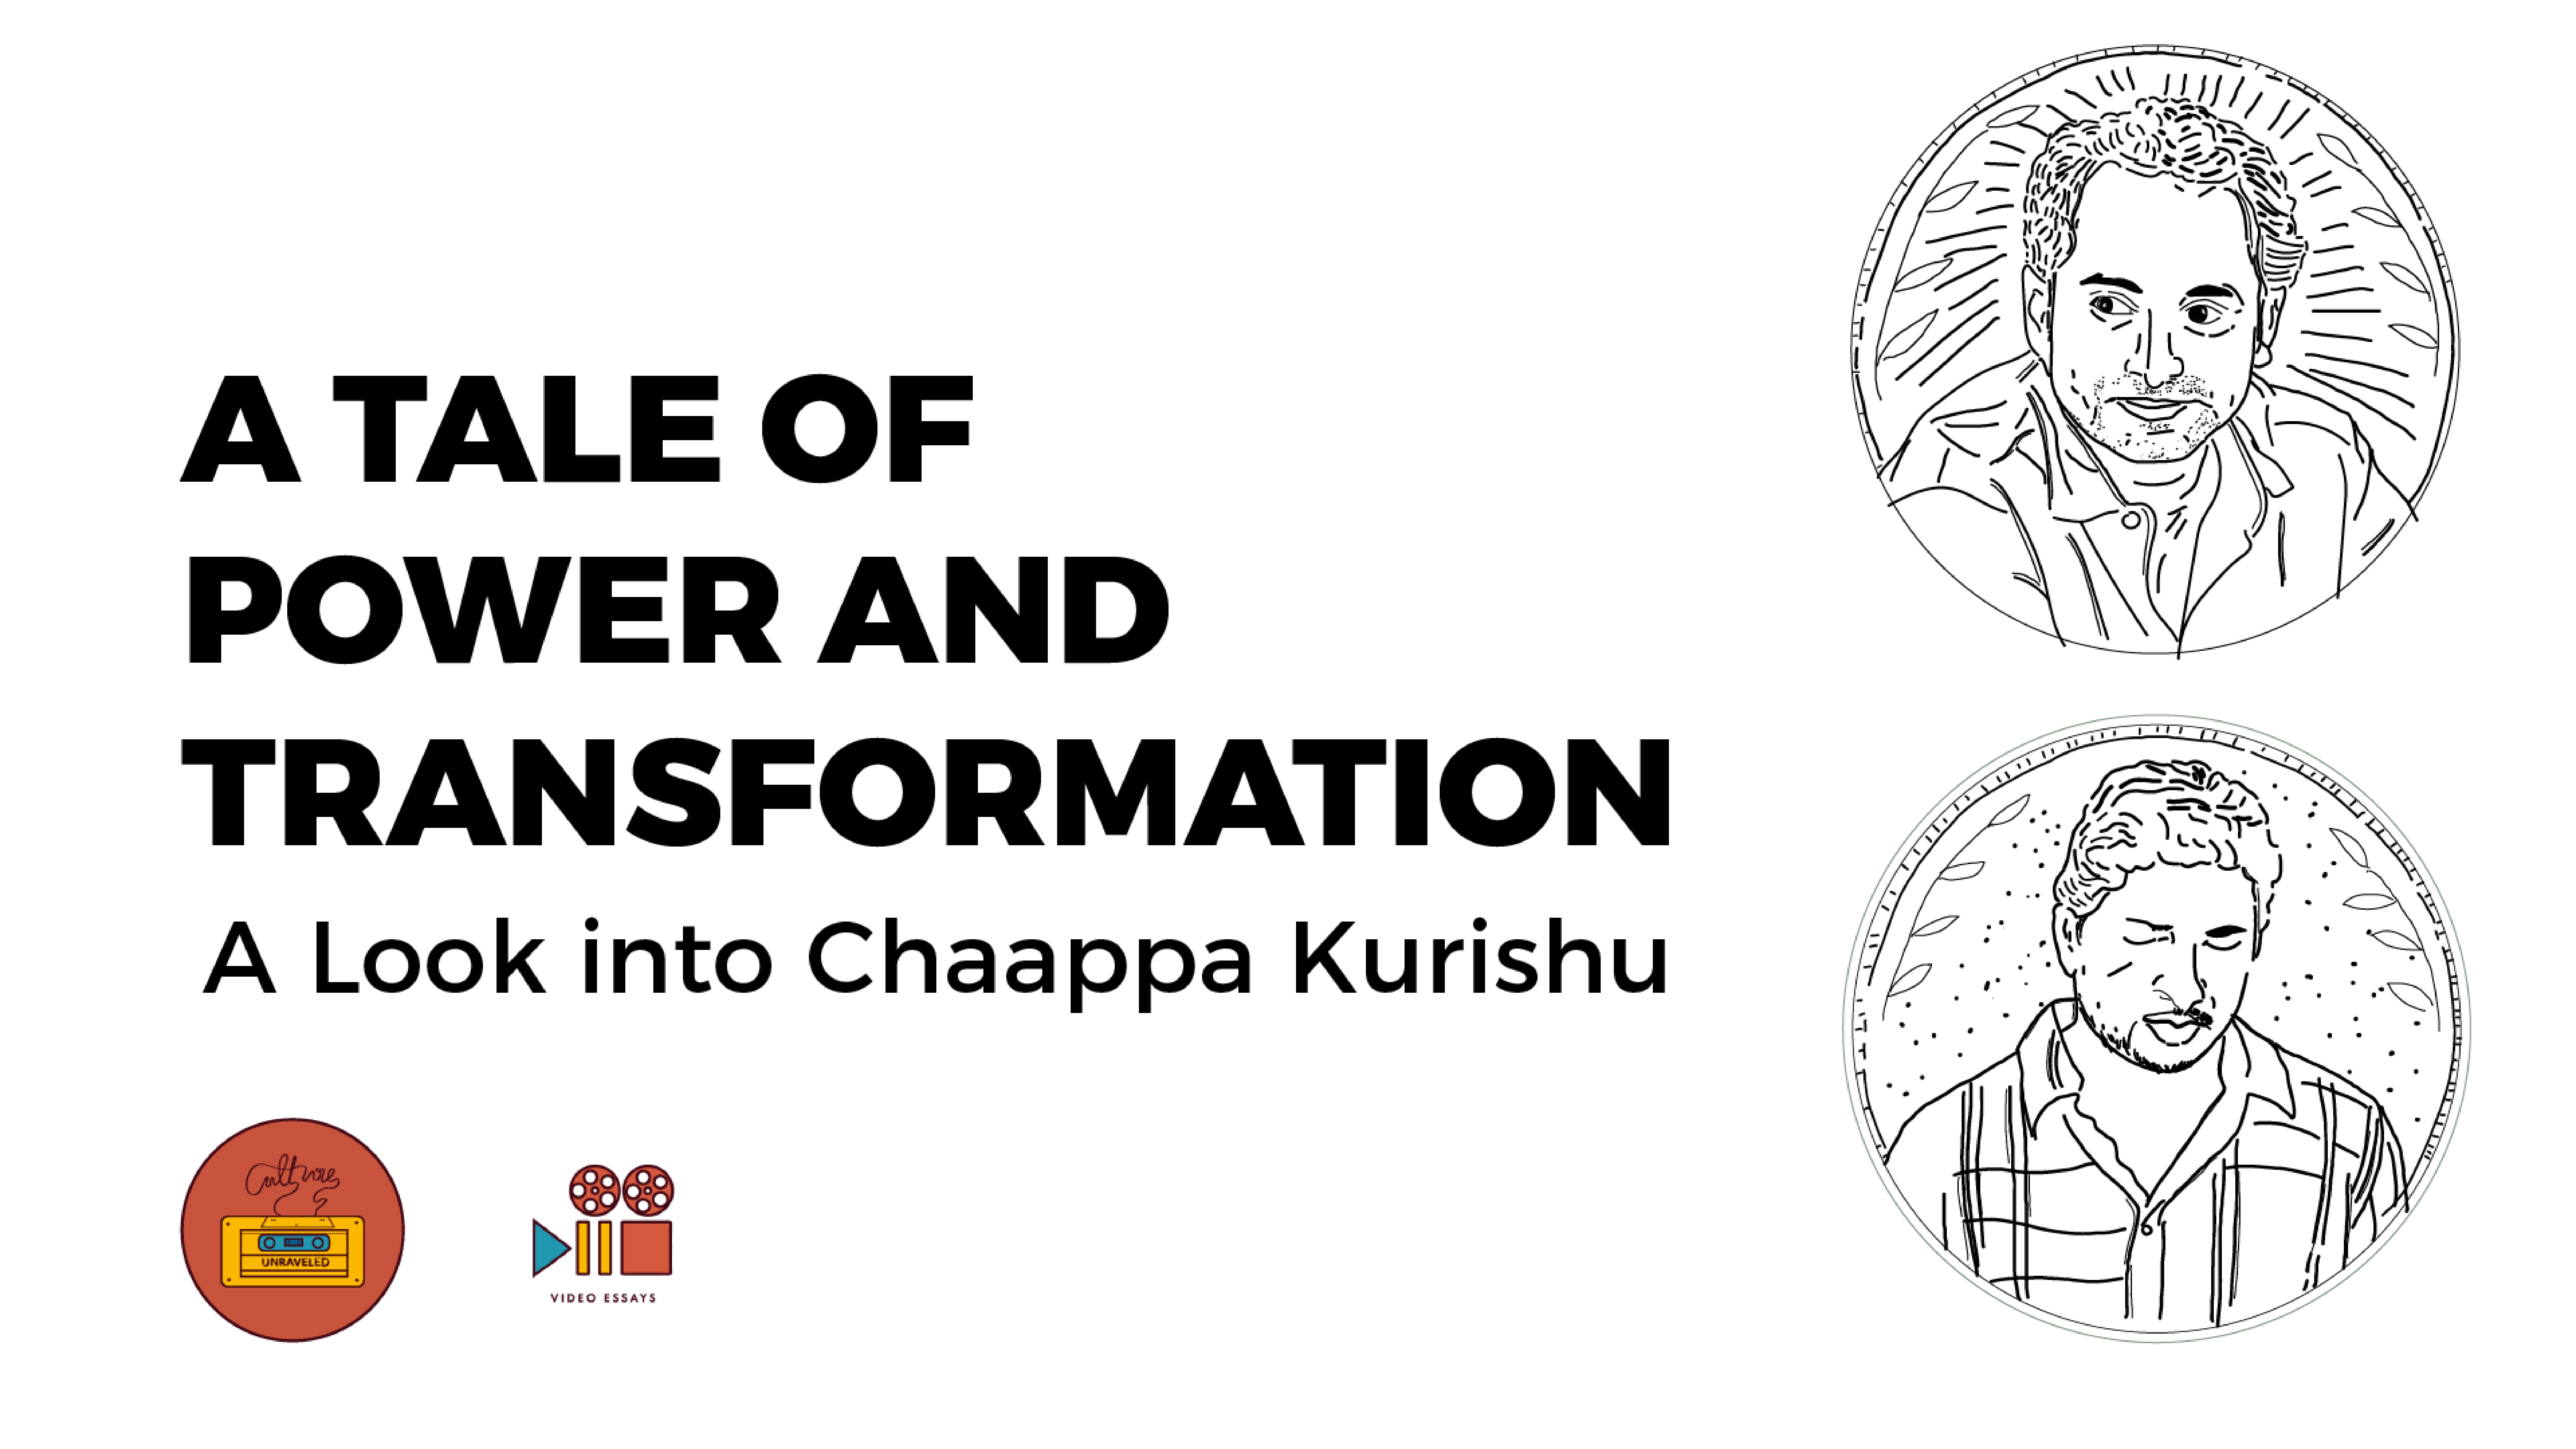 A Tale of Power and Transformation. A look into Chaappa Kurishu